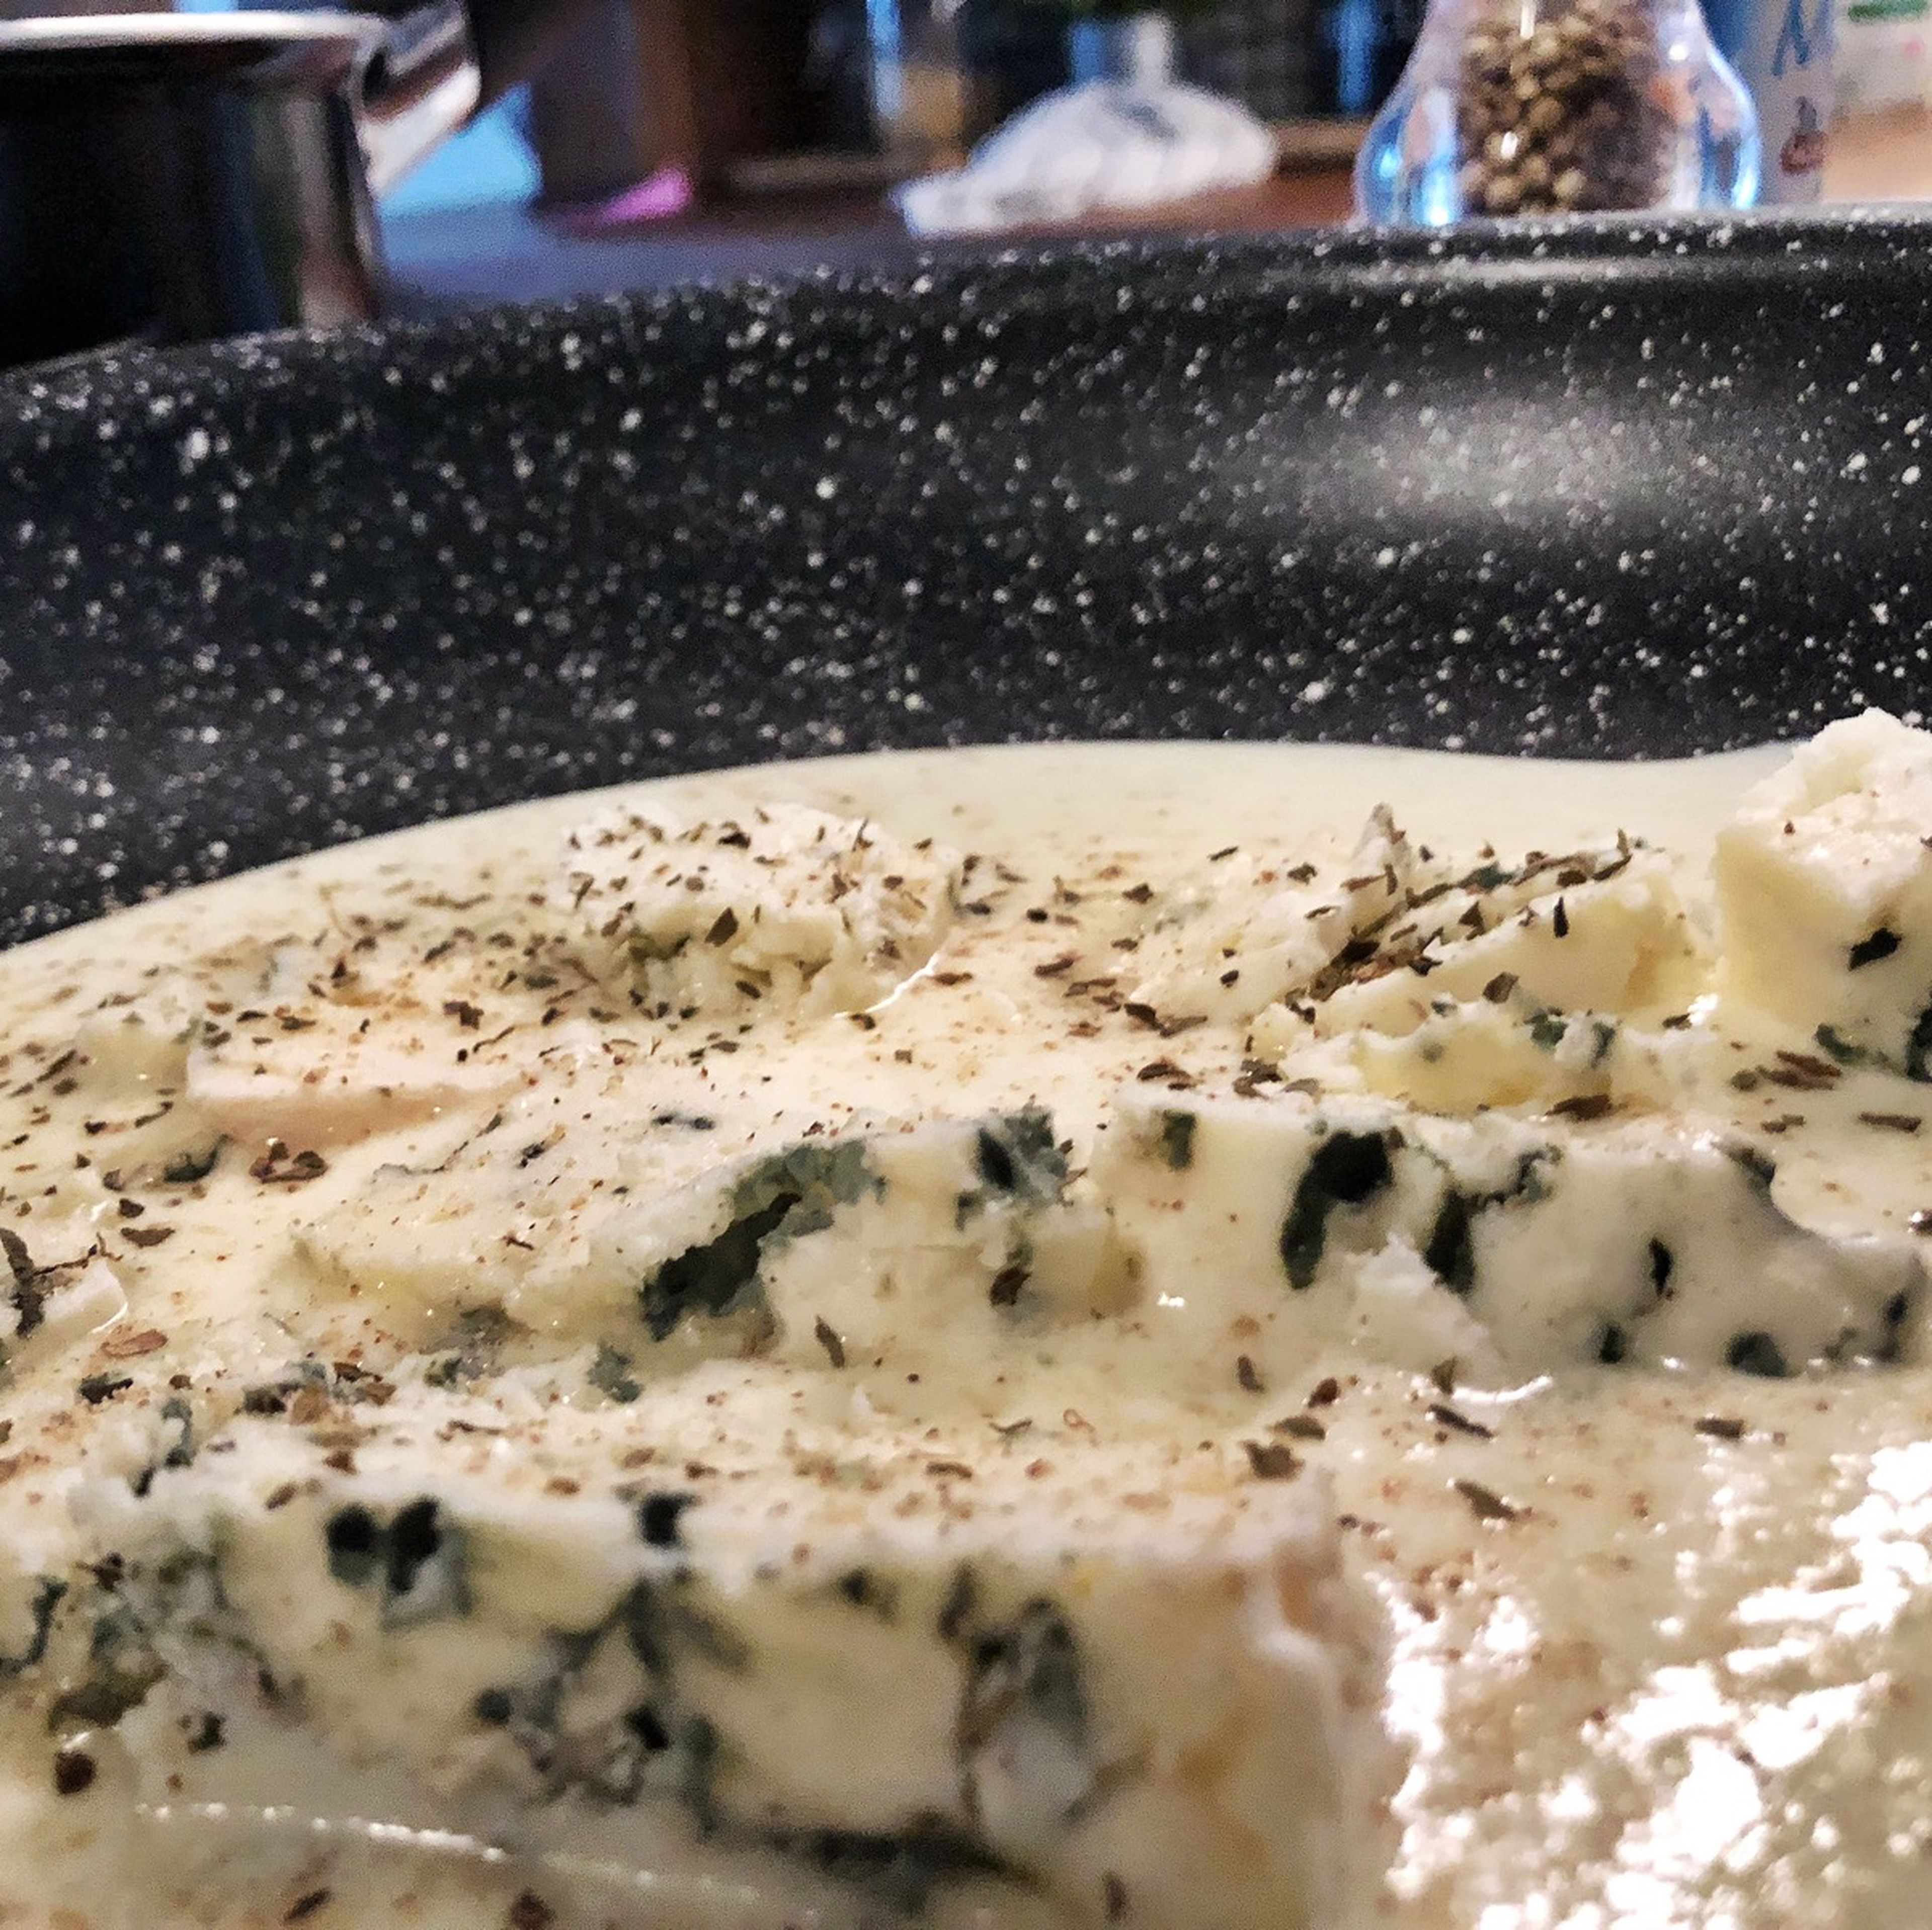 Melt the Roquefort cheese with the cream in a pan over low heat. At the same time, bake the fresh pasta in boiling salted water.